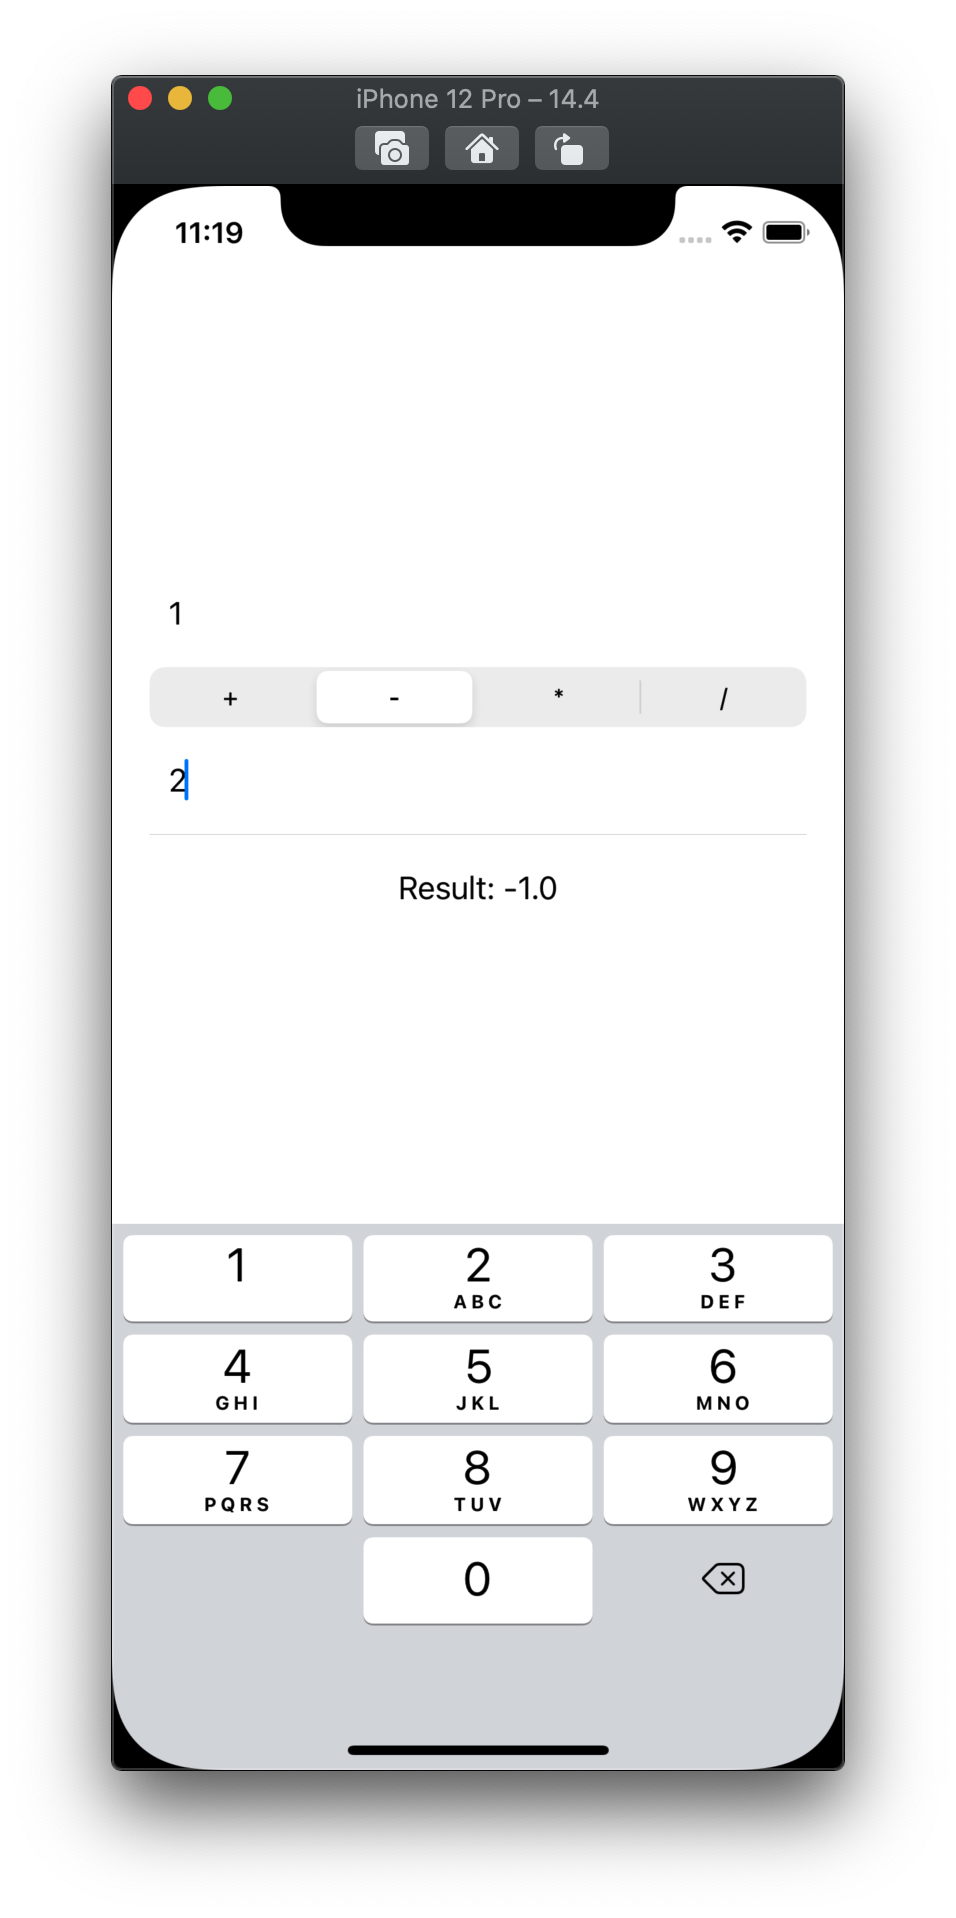 Our iOS calculator is working and calculating the correct value